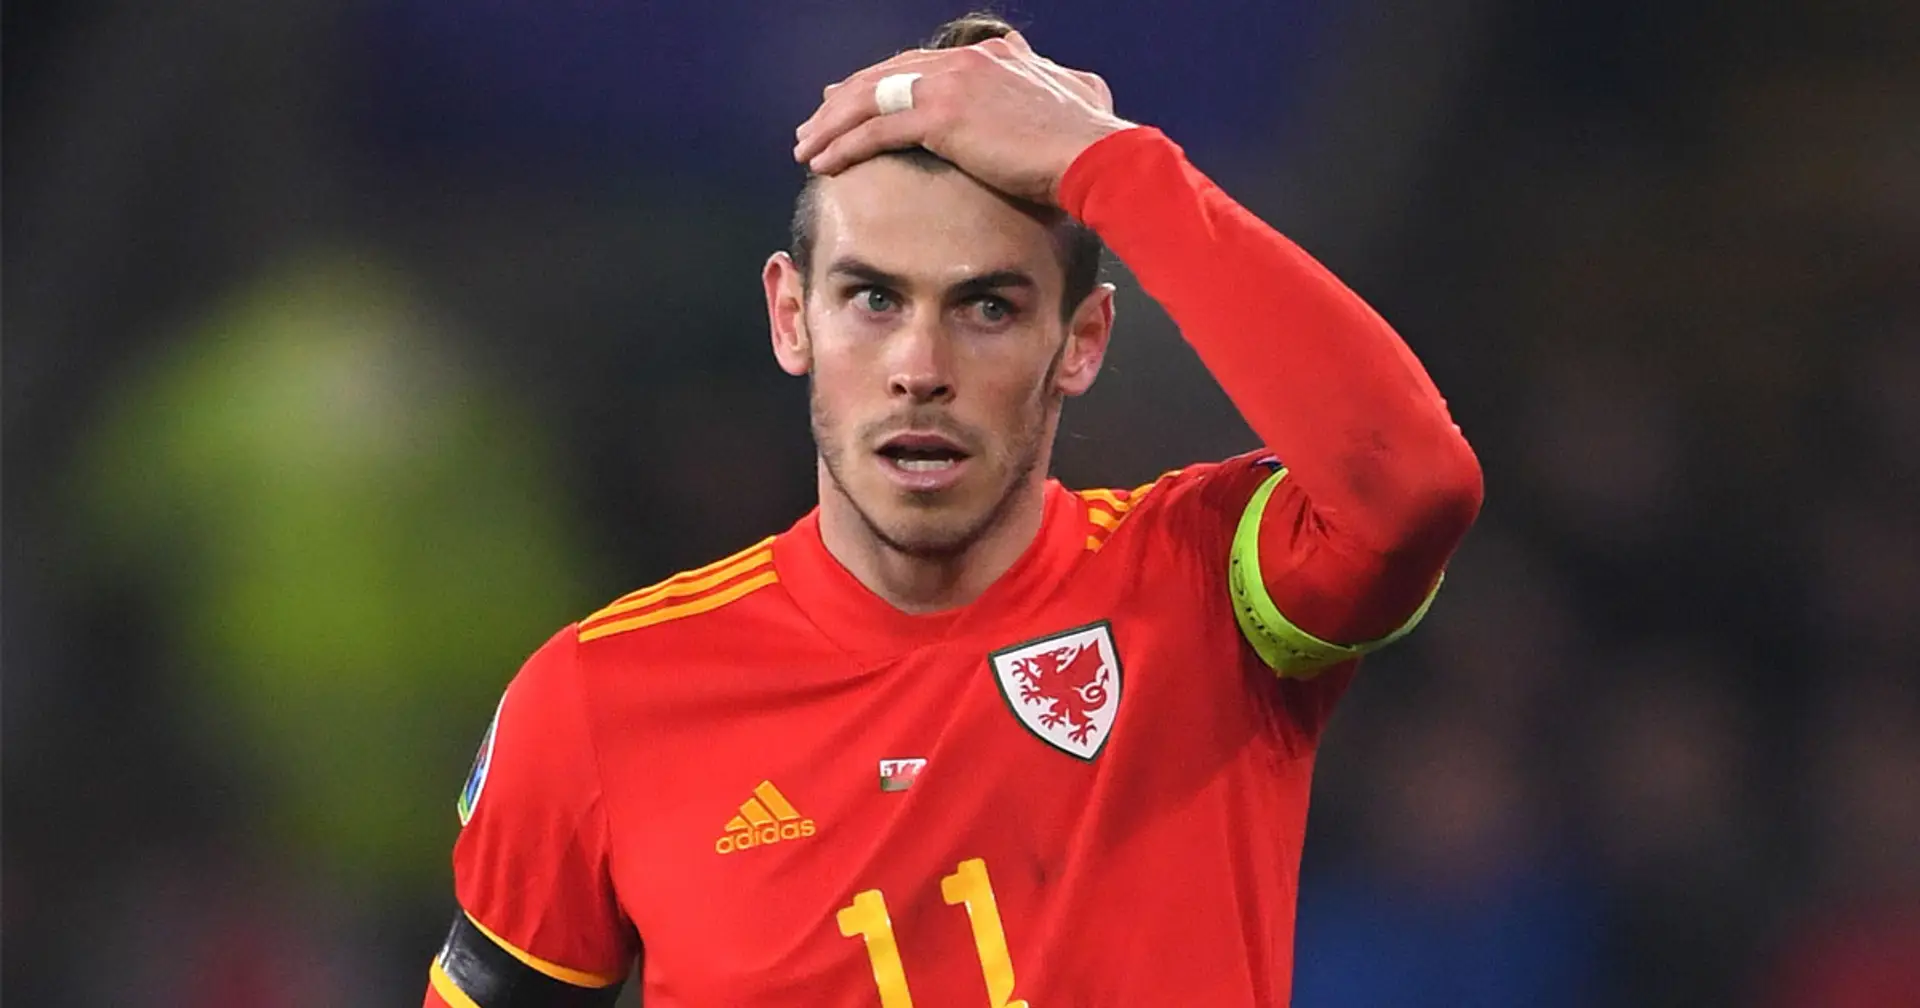 Bale subbed at half-time after disappointing return to action for Wales in UEFA Nations League clash